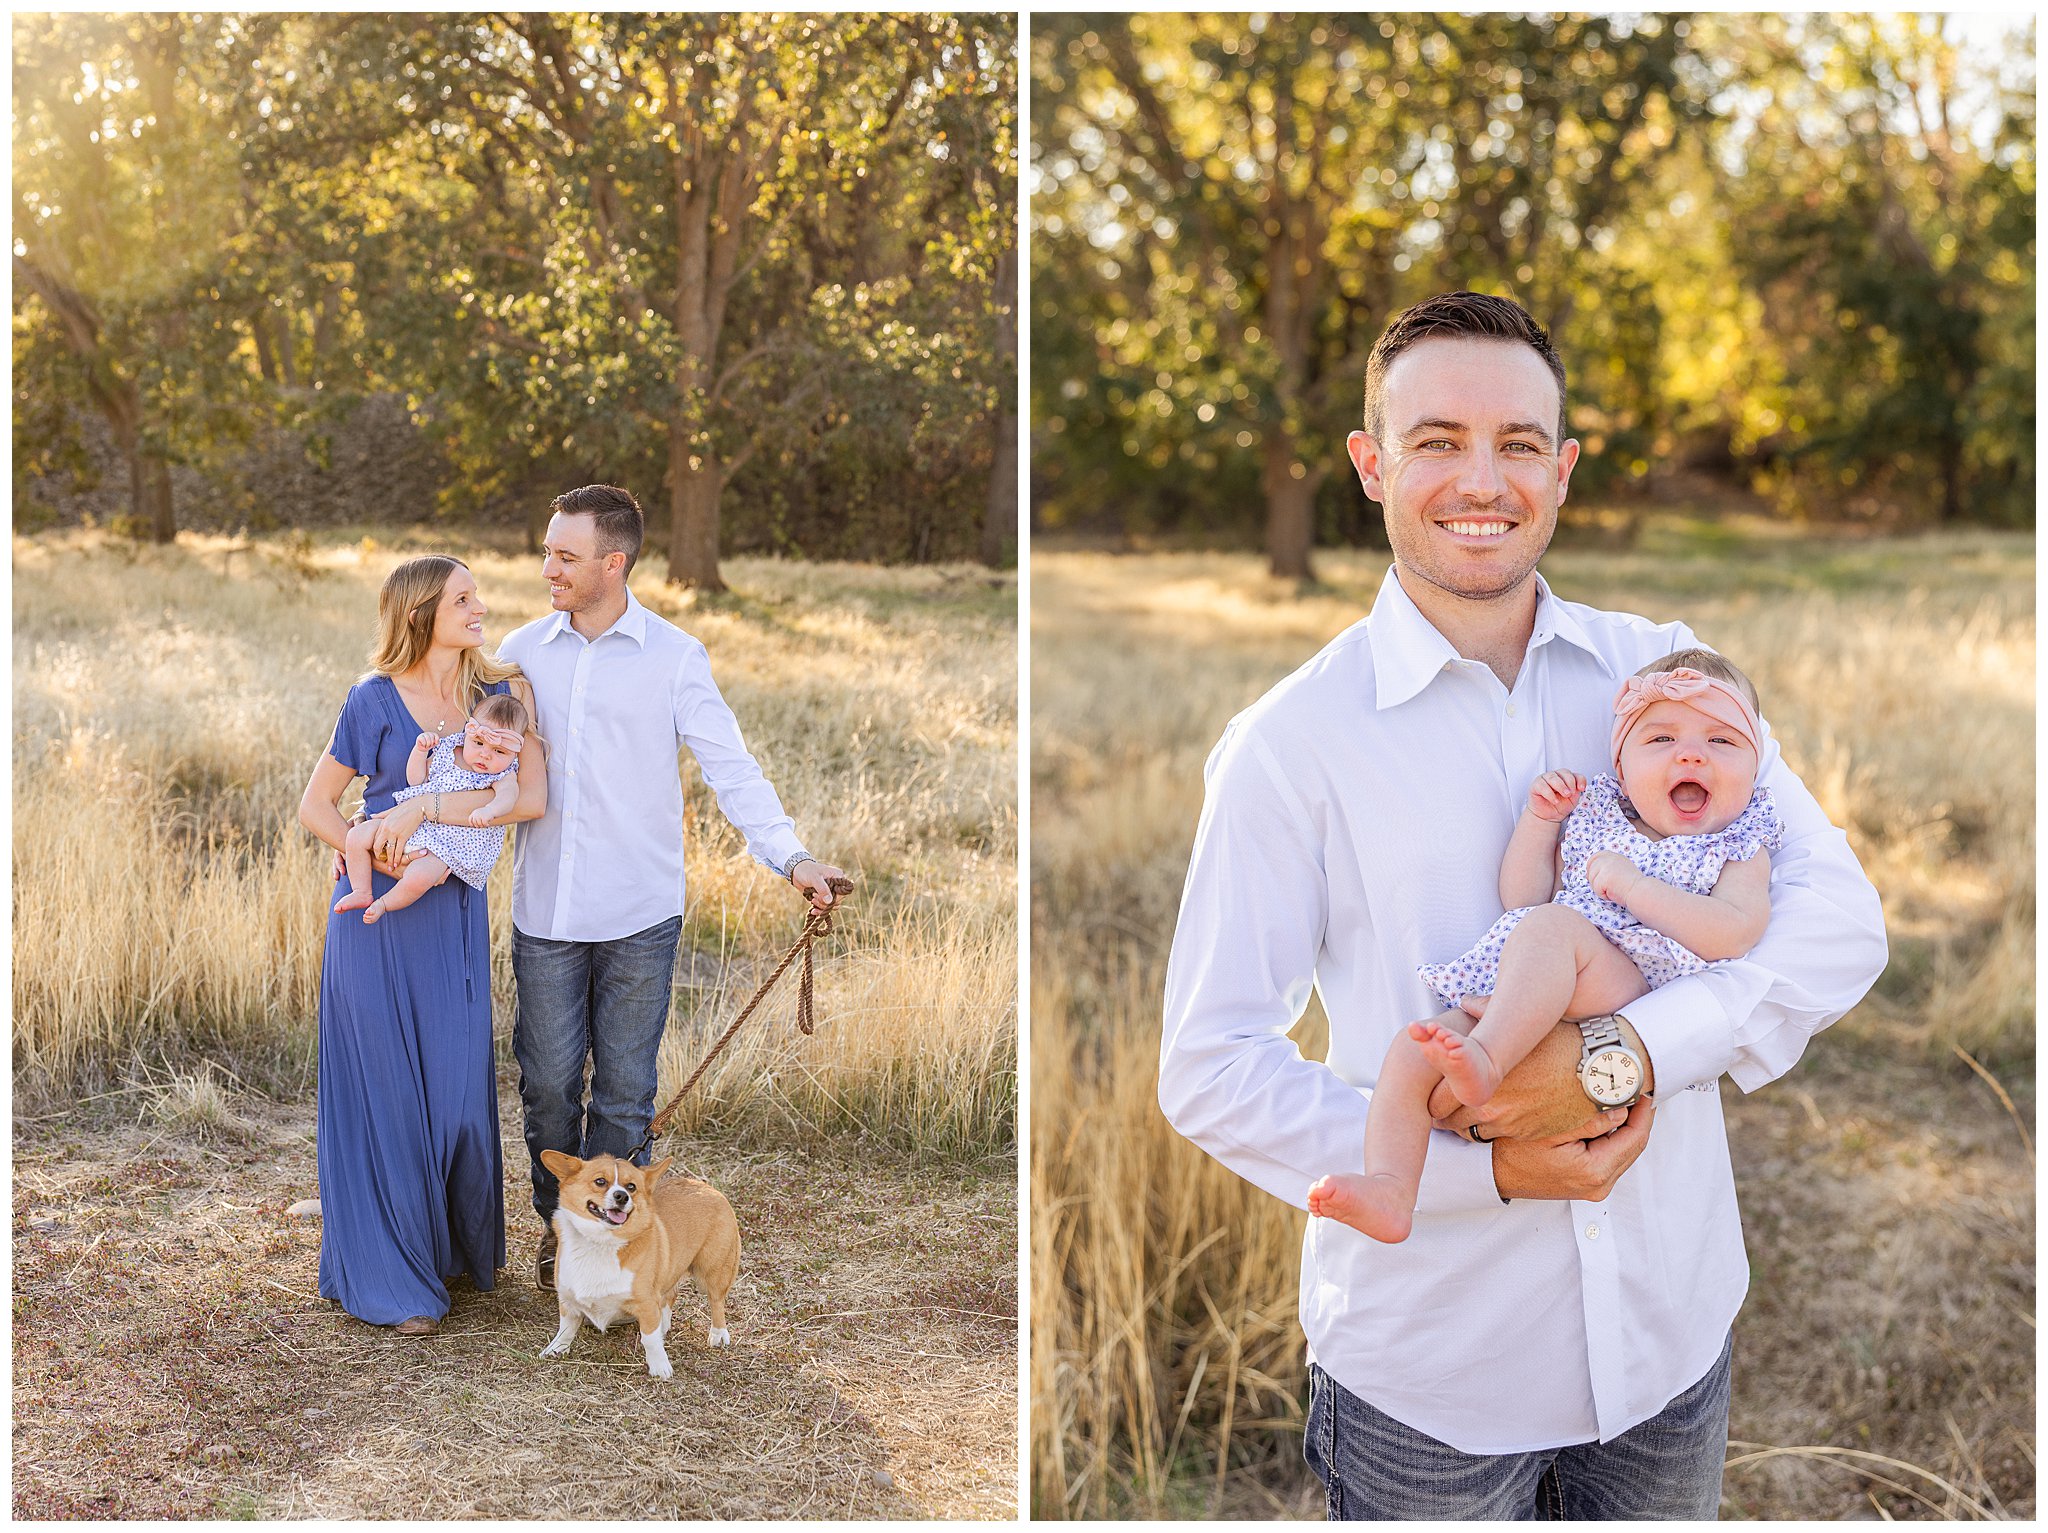 Grass Field Fall Mini Sessions Chico CA October Family Maternity Gender Reveal Baby Siblings Dog,